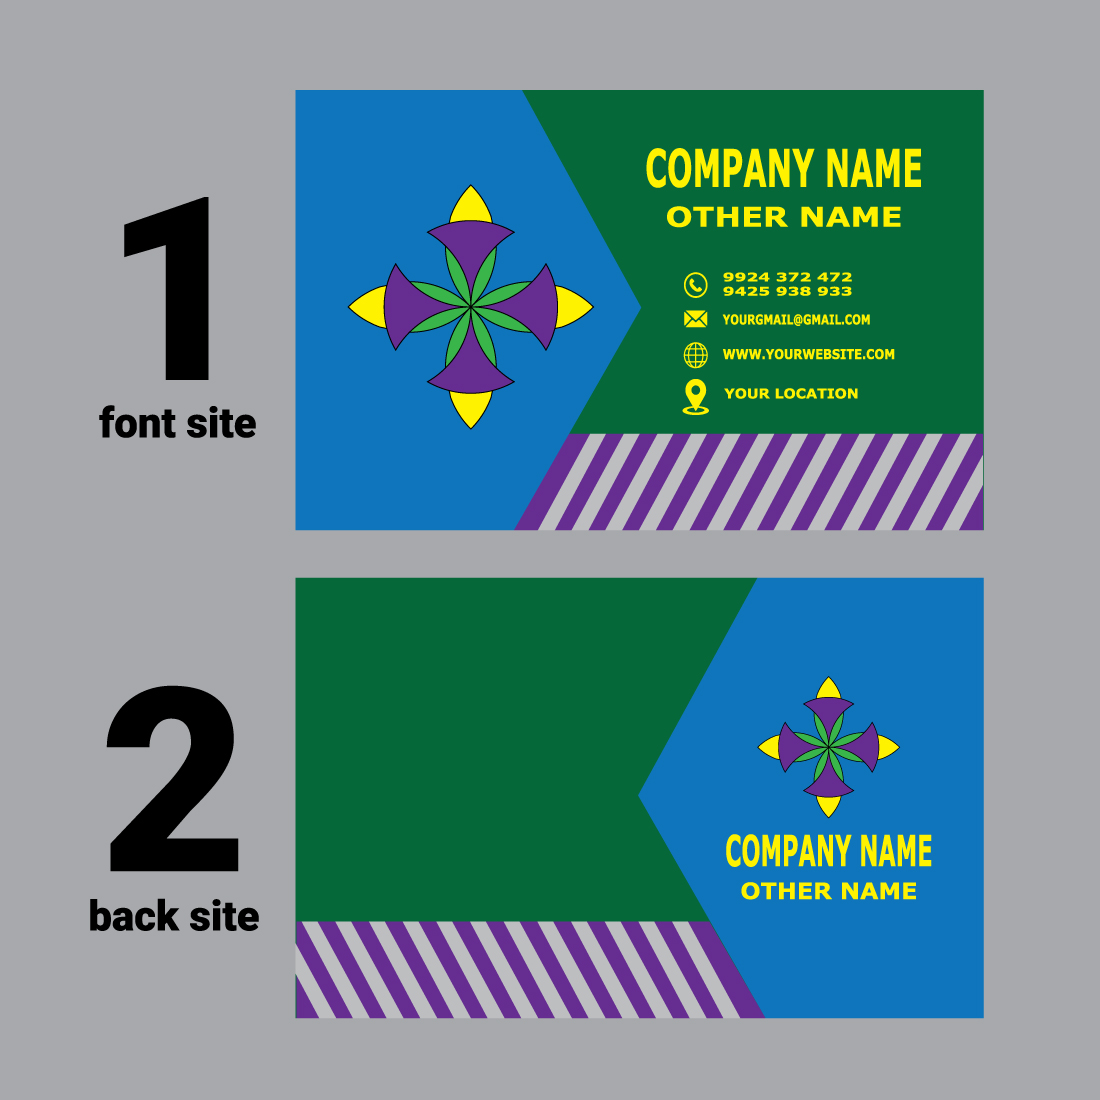 business card design and illustration template vector, preview image.